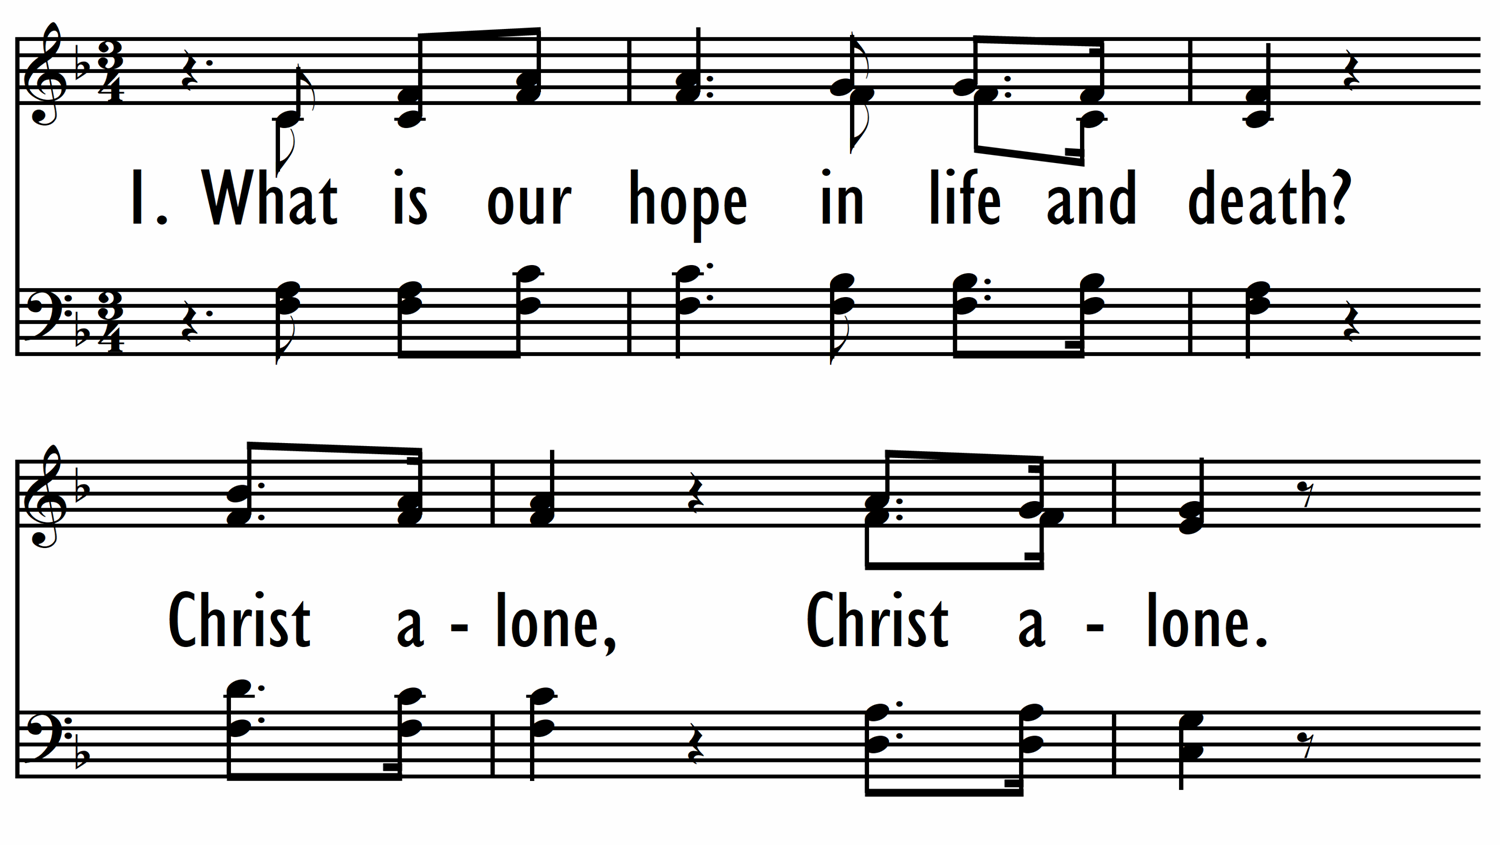 CHRIST OUR HOPE IN LIFE AND DEATH - Hymn-ppt